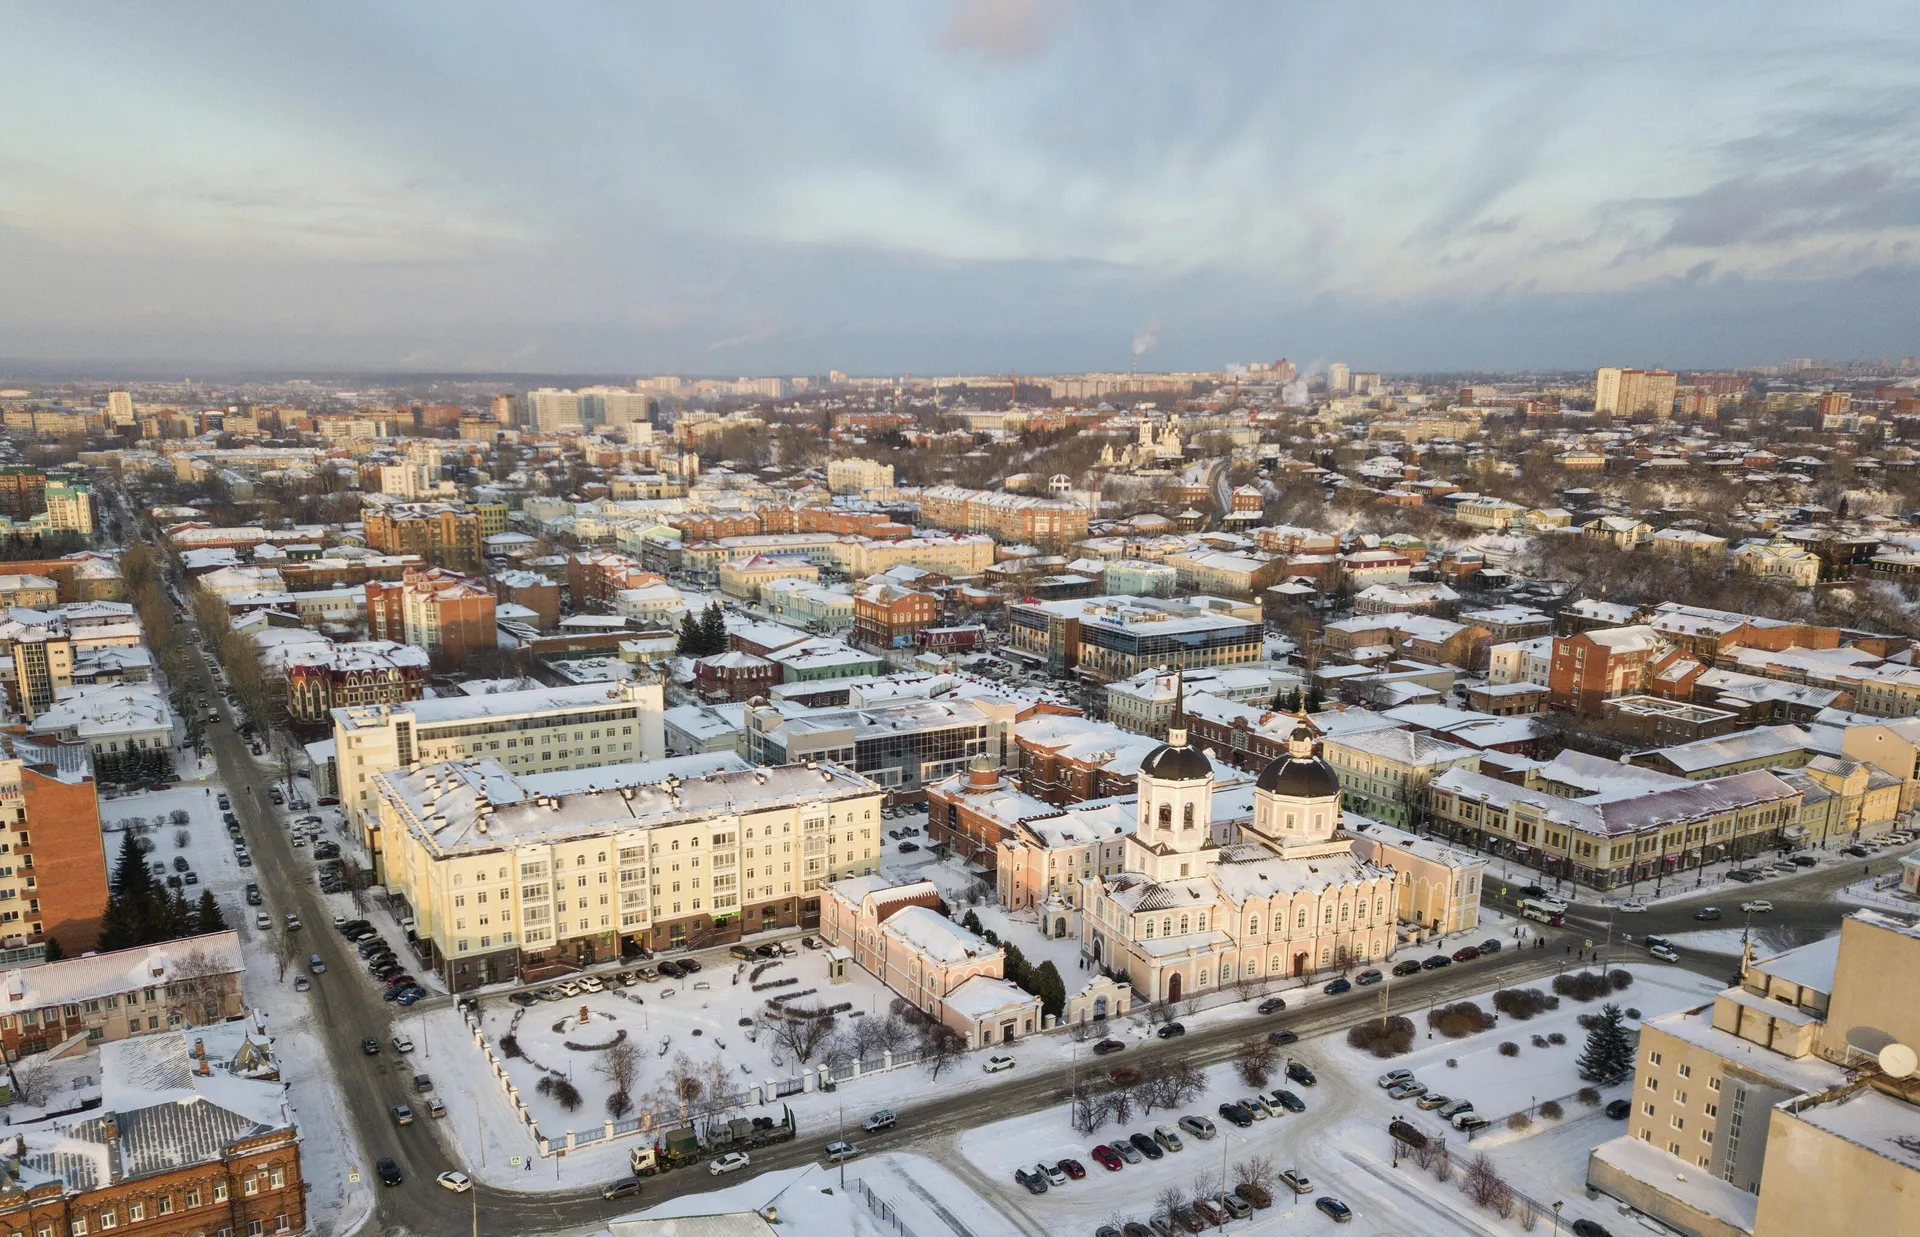 View of the city of Tomsk from a bird's eye view